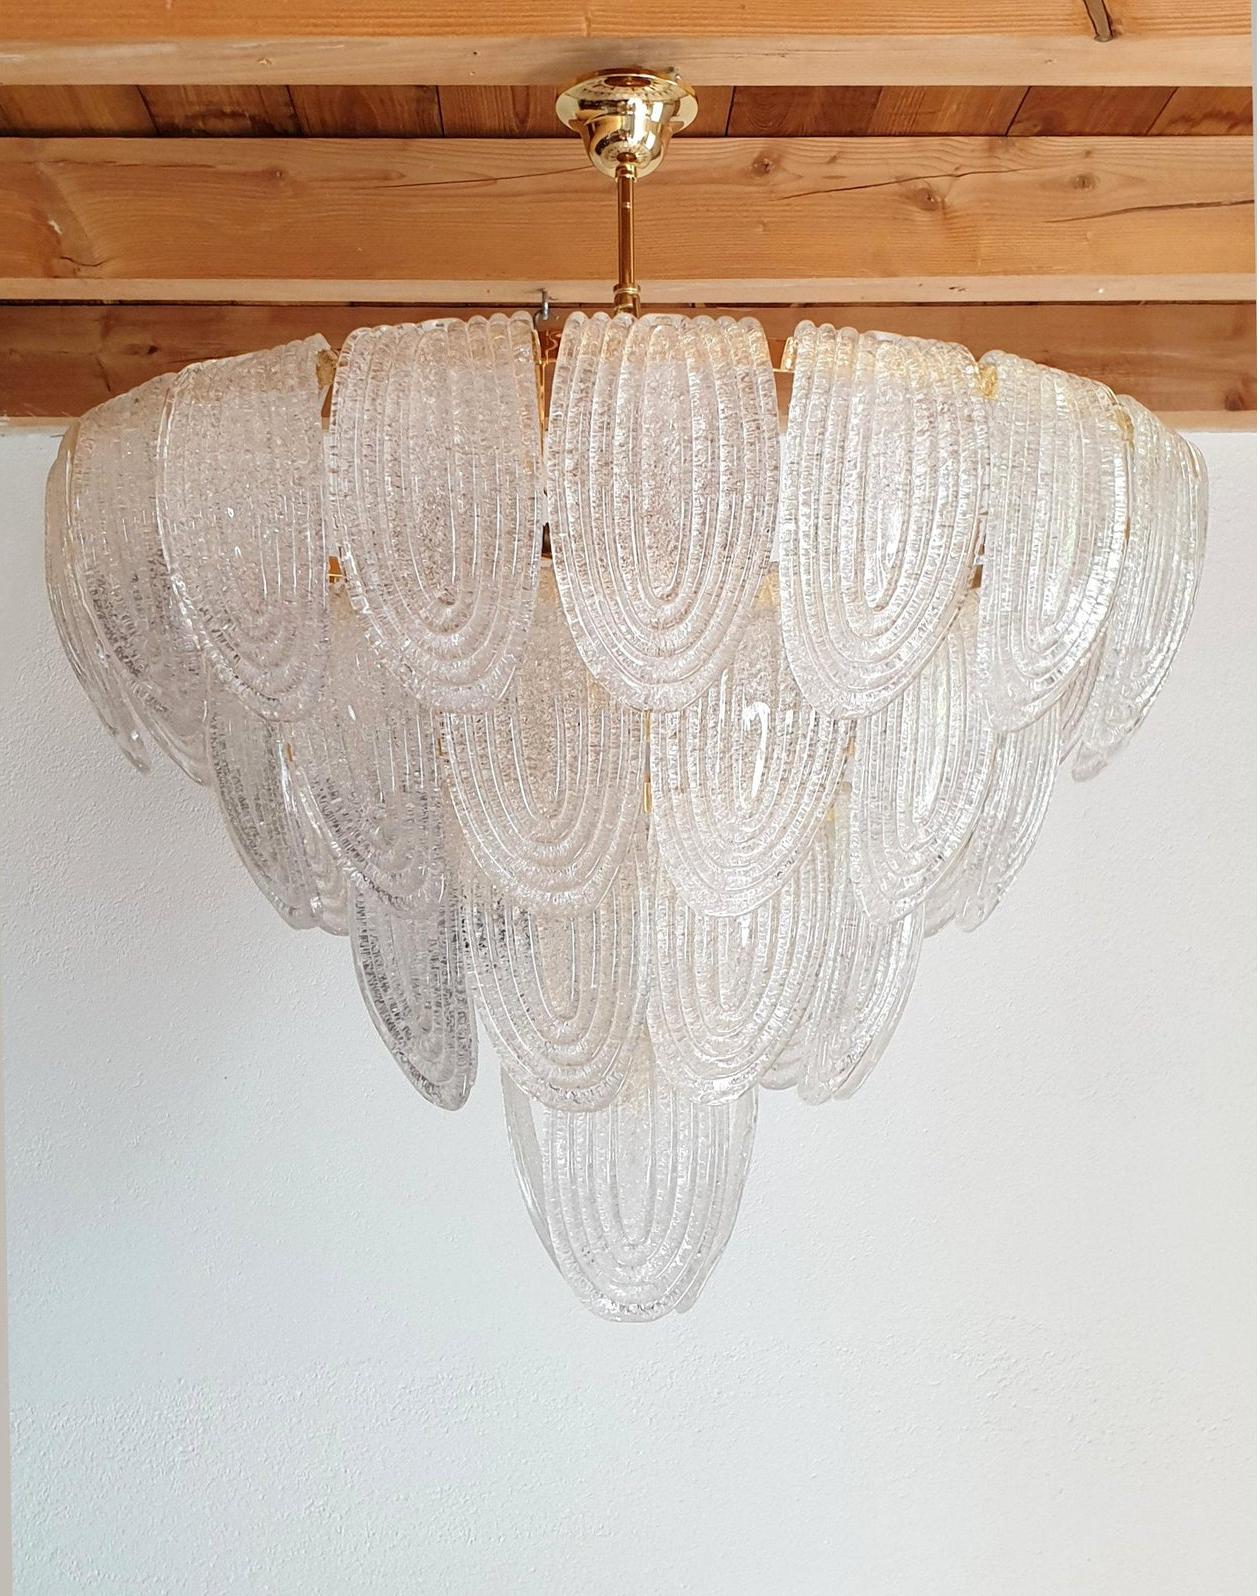 Mid-Century Modern large translucent and textured Murano glass chandelier, with gold-plated frame and chain.
The vintage Murano chandelier is attributed to AV Mazzega, Italy, 1970s
Can be hanged as a flush mount fixture, or as a chandelier, with a